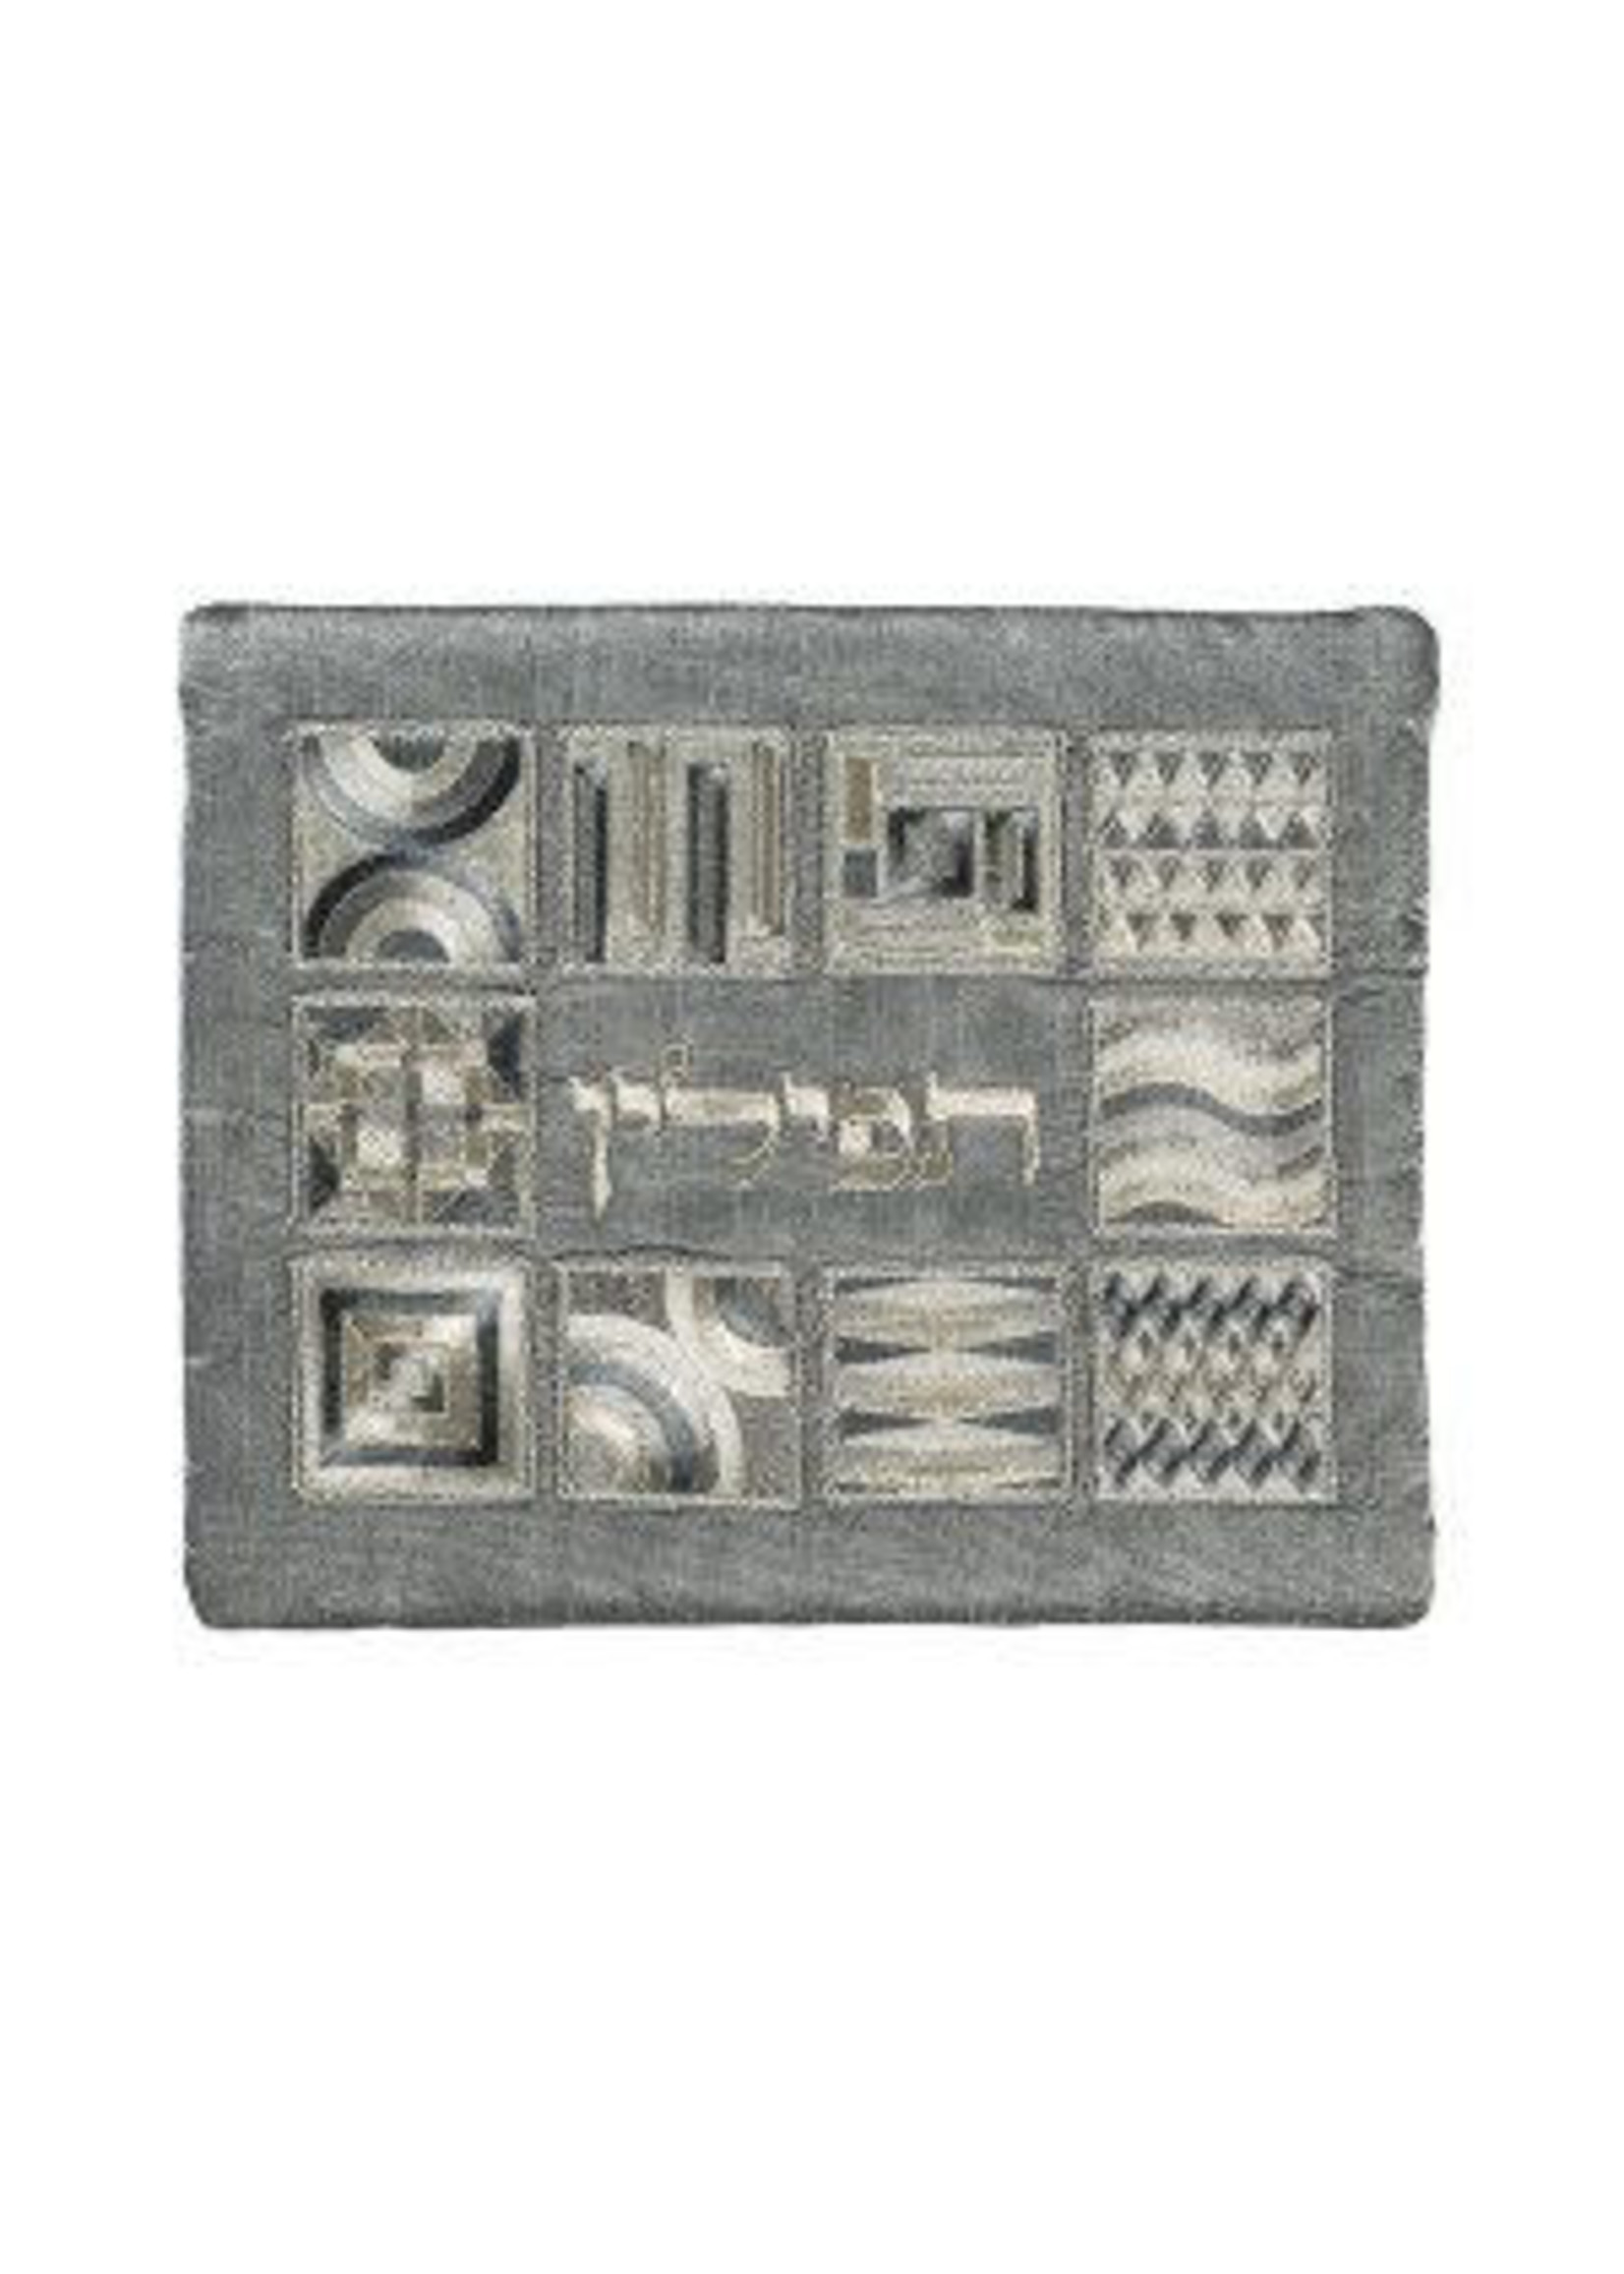 TEFILLIN BAG EMBROIDERED SILVER